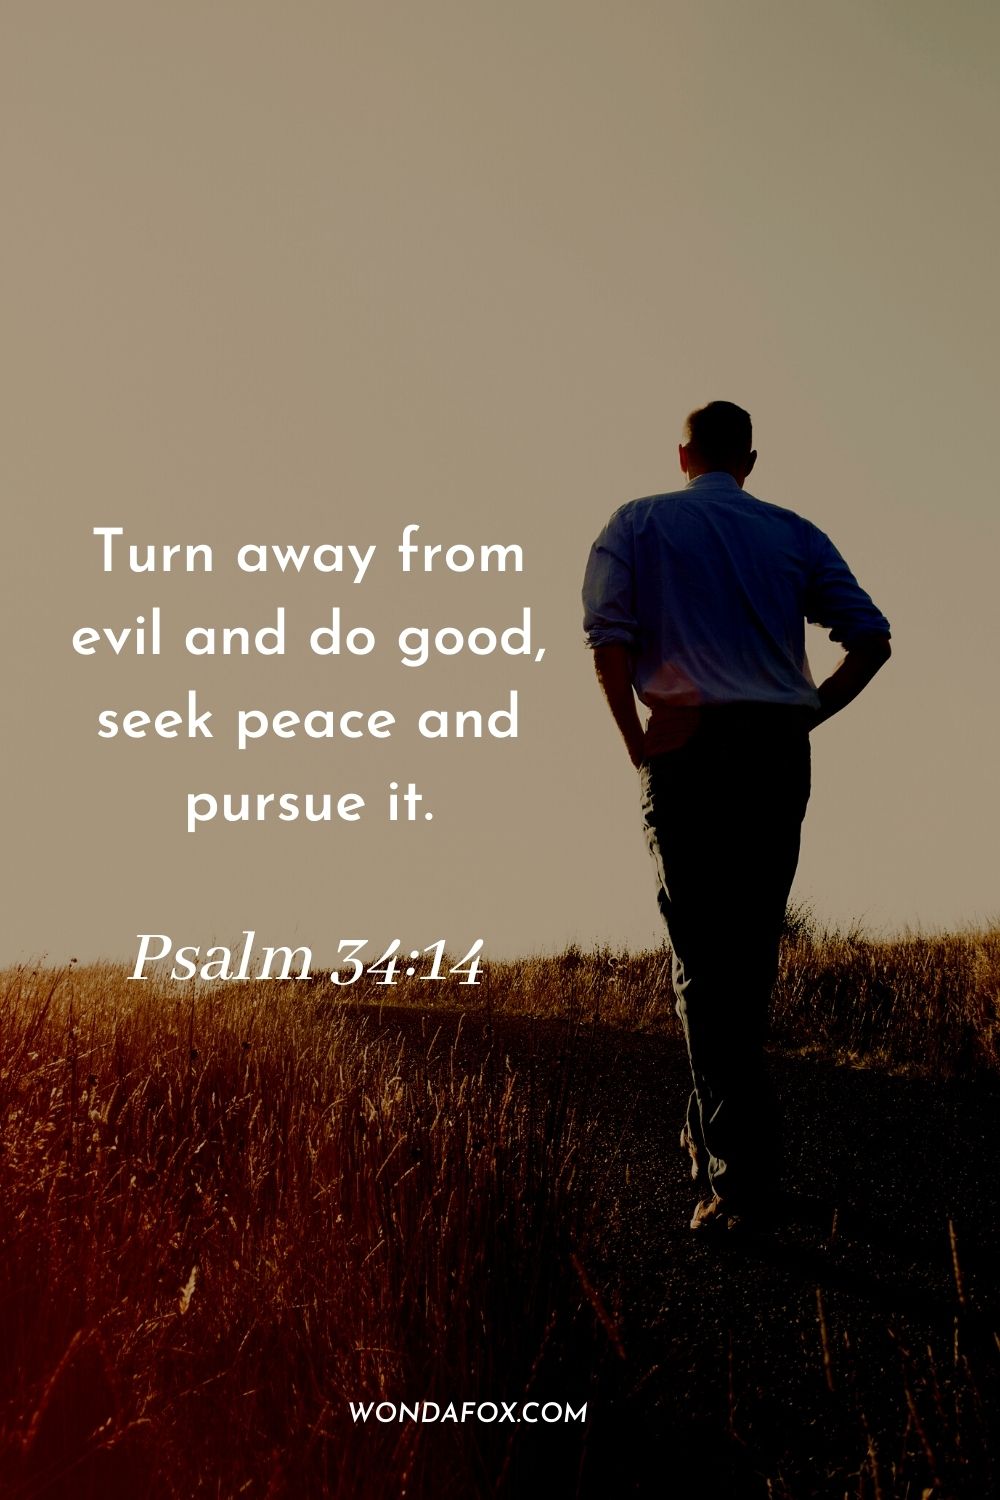 Turn away from evil and do good, seek peace and pursue it. Psalm 34:14